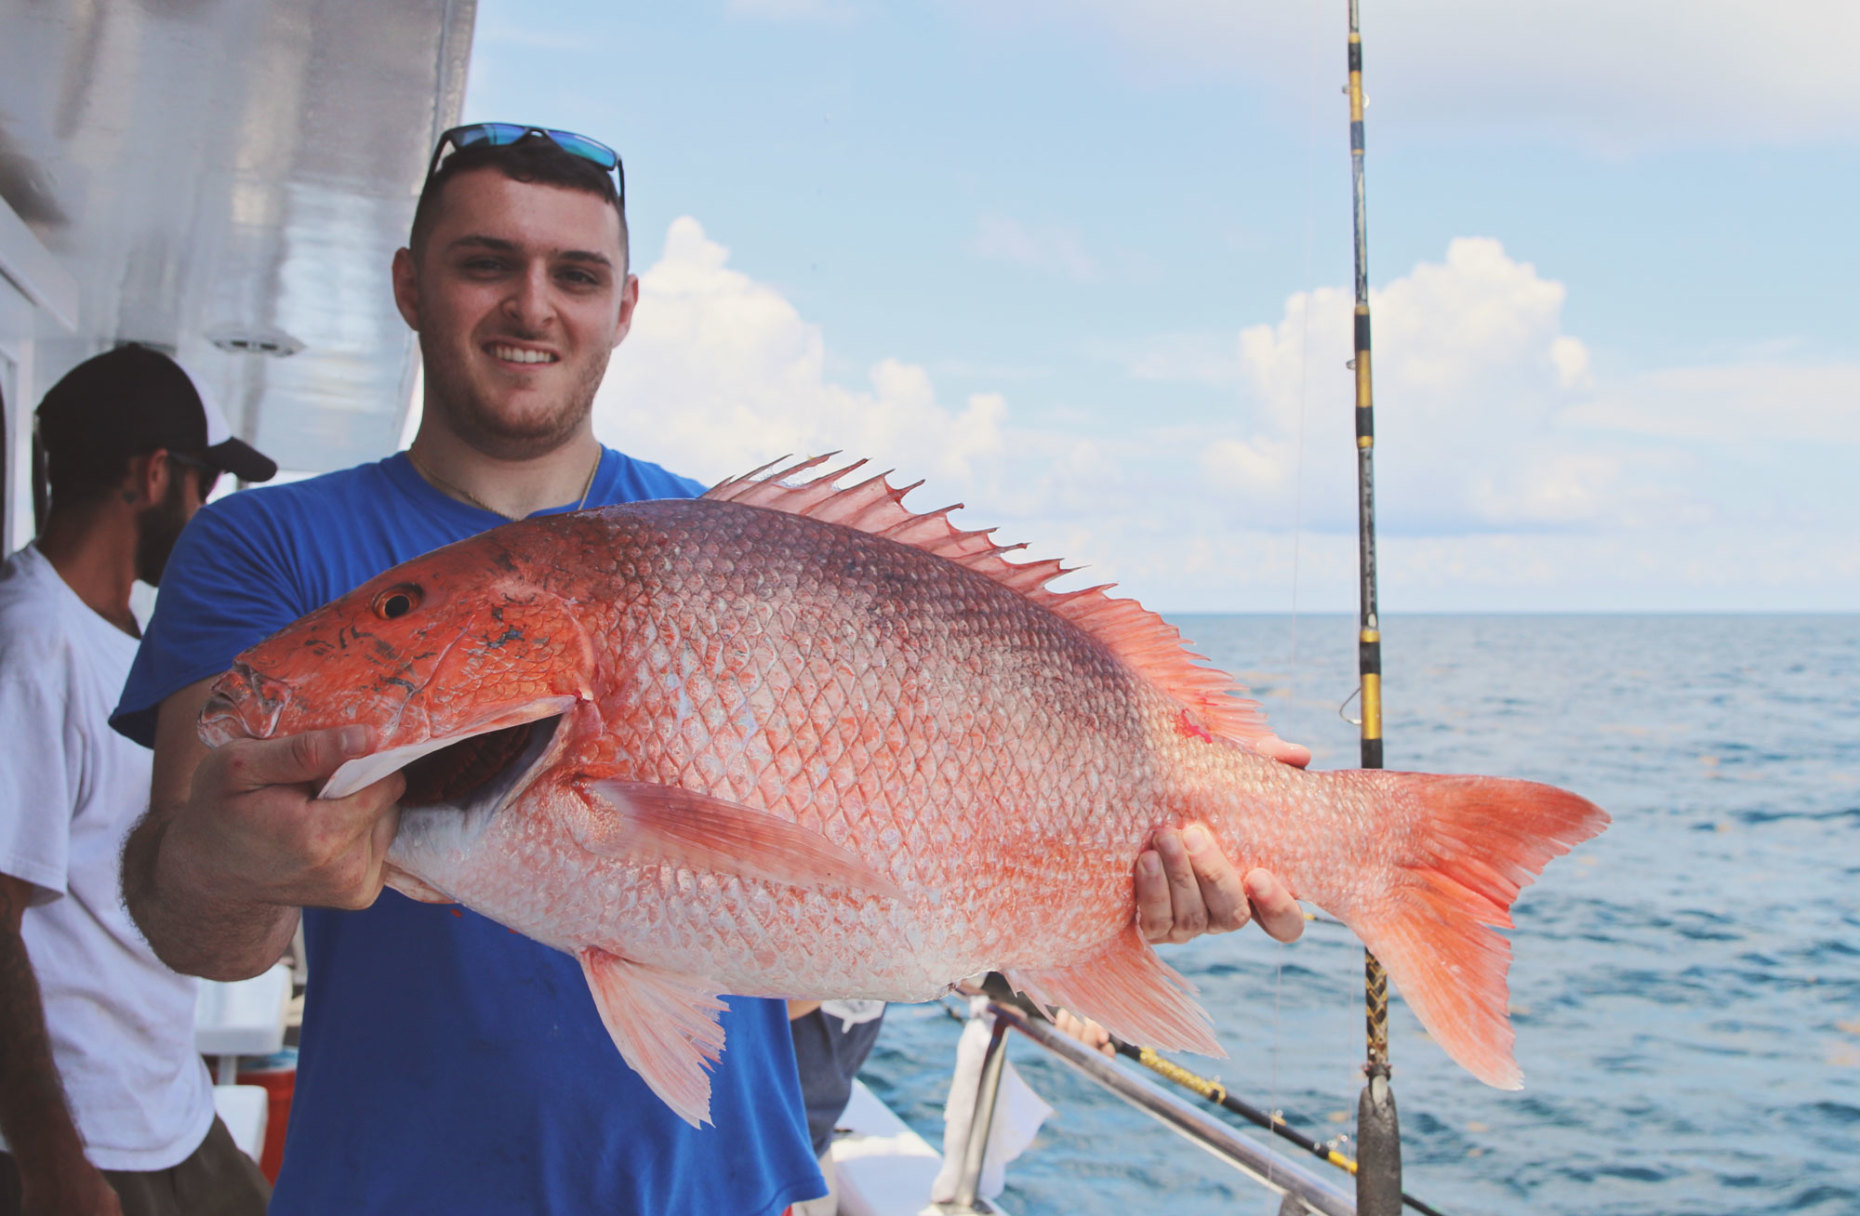 Full-Day Deep Sea Fishing Trip: Book Tours & Activities at